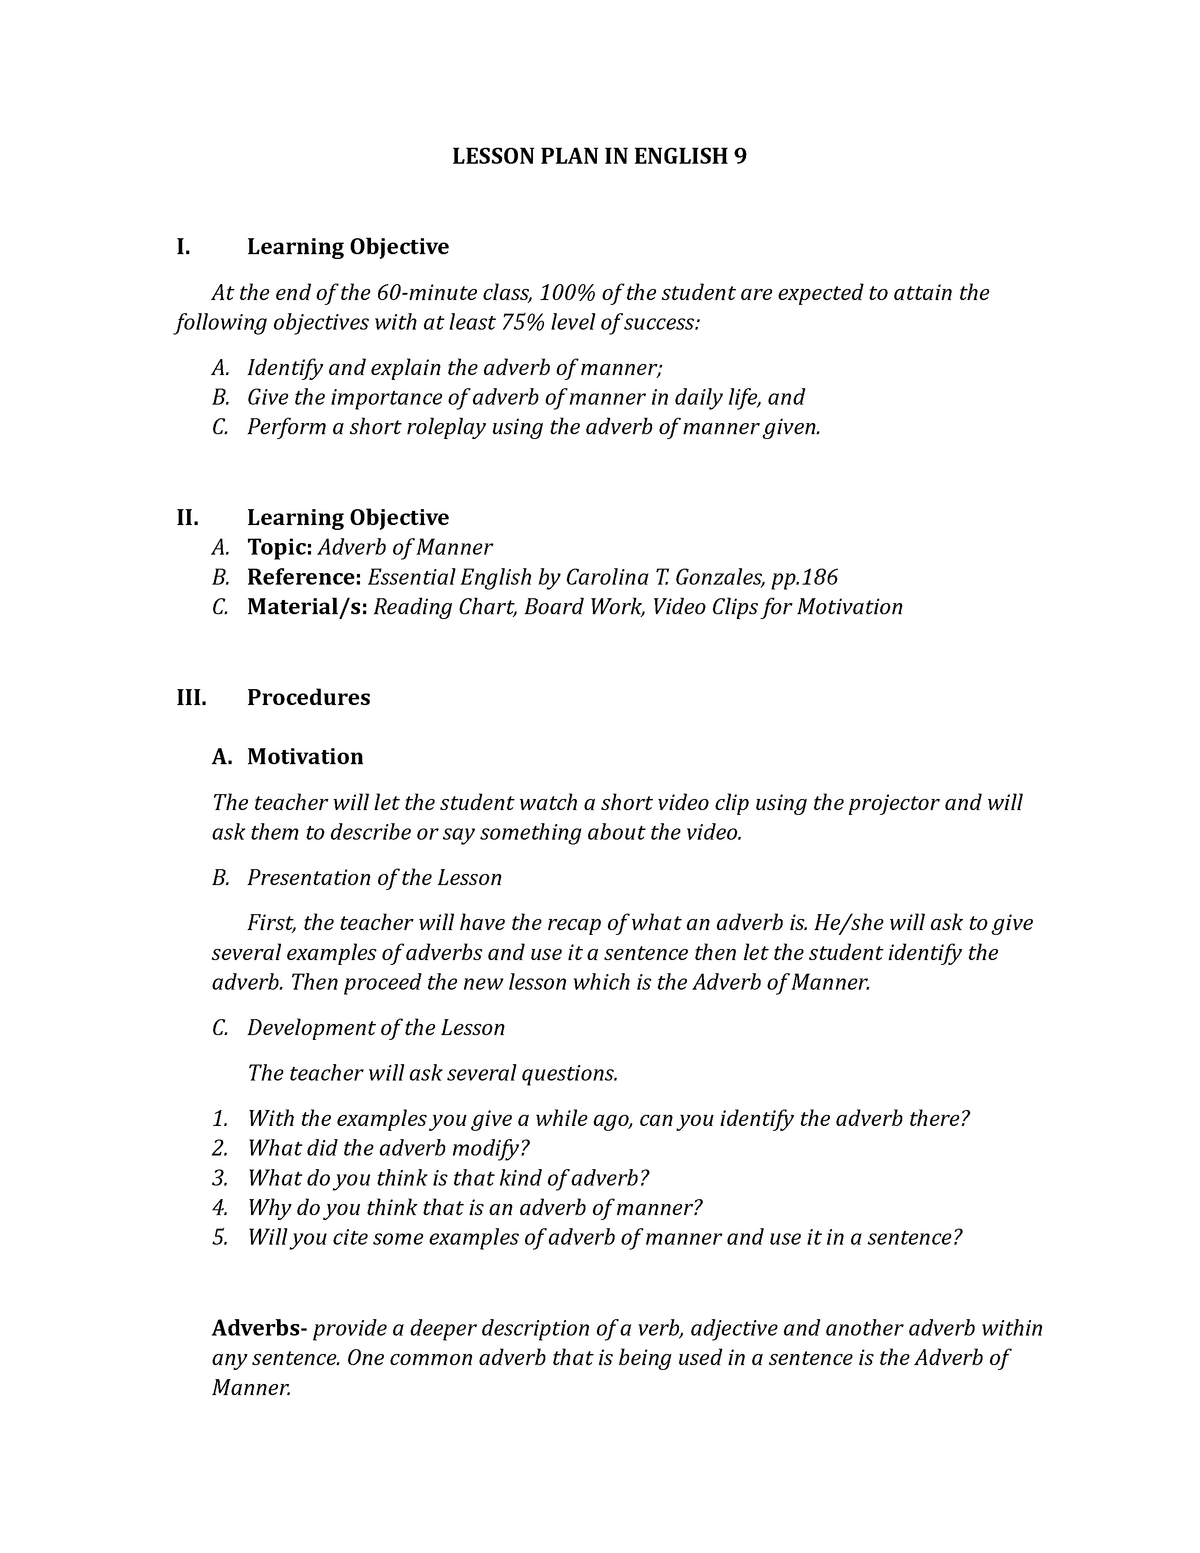 lesson-plan-on-adverb-of-manner-guide-bachelor-of-secondary-education